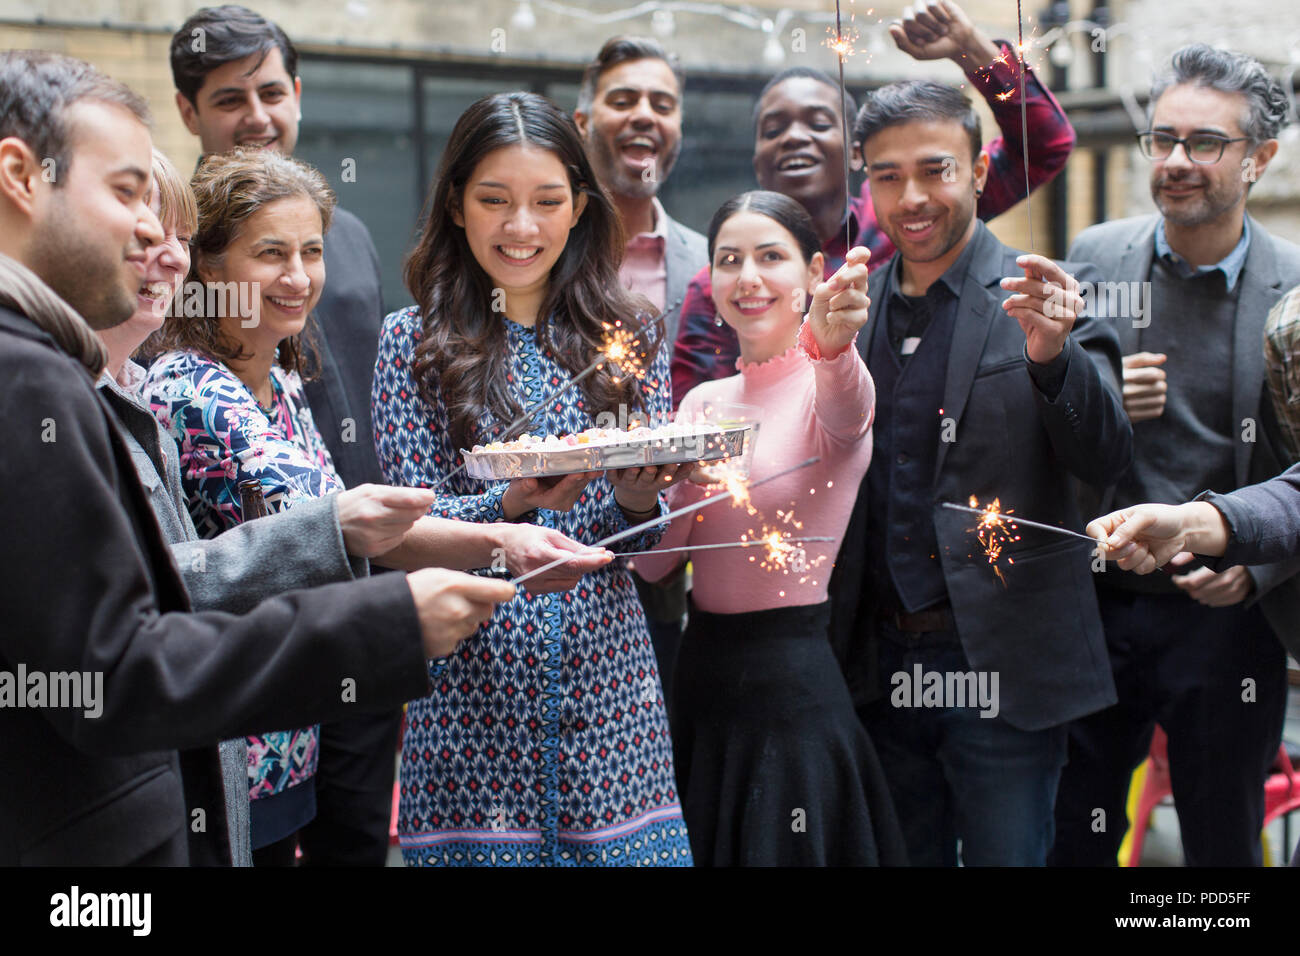 Friends with sparklers celebrating with woman holding birthday cake Stock Photo